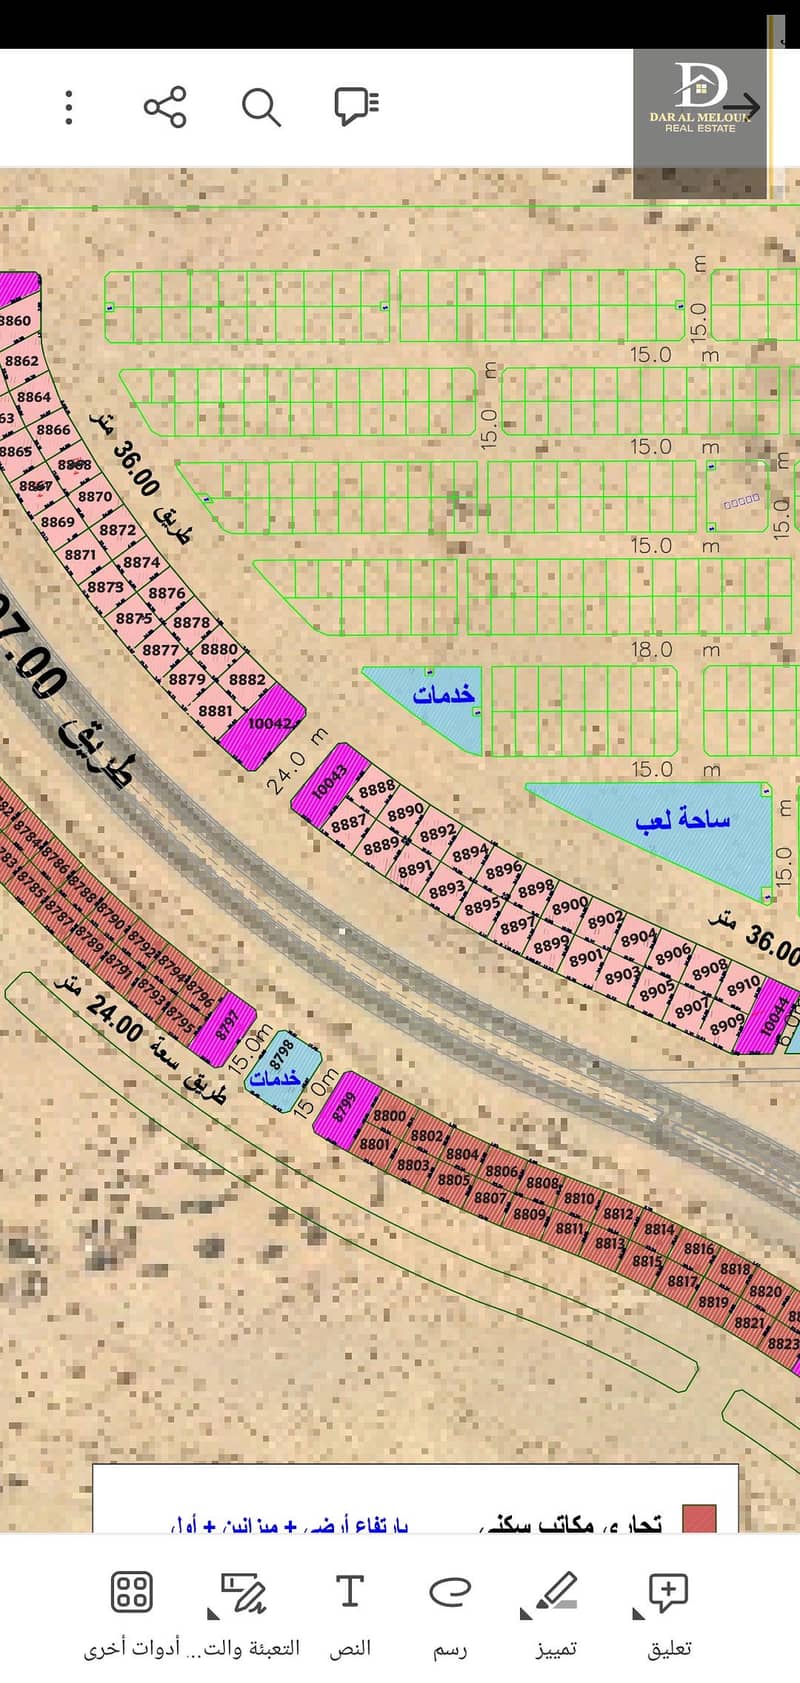 For sale in Sharjah, Muzaira’a area, Al-Rahmaniyah suburb, commercial and residential land, area of ​​5,300 feet, ground permit, two storerooms, and first freehold ownership for all Arab nationalities. Excellent location, second piece of the main street,